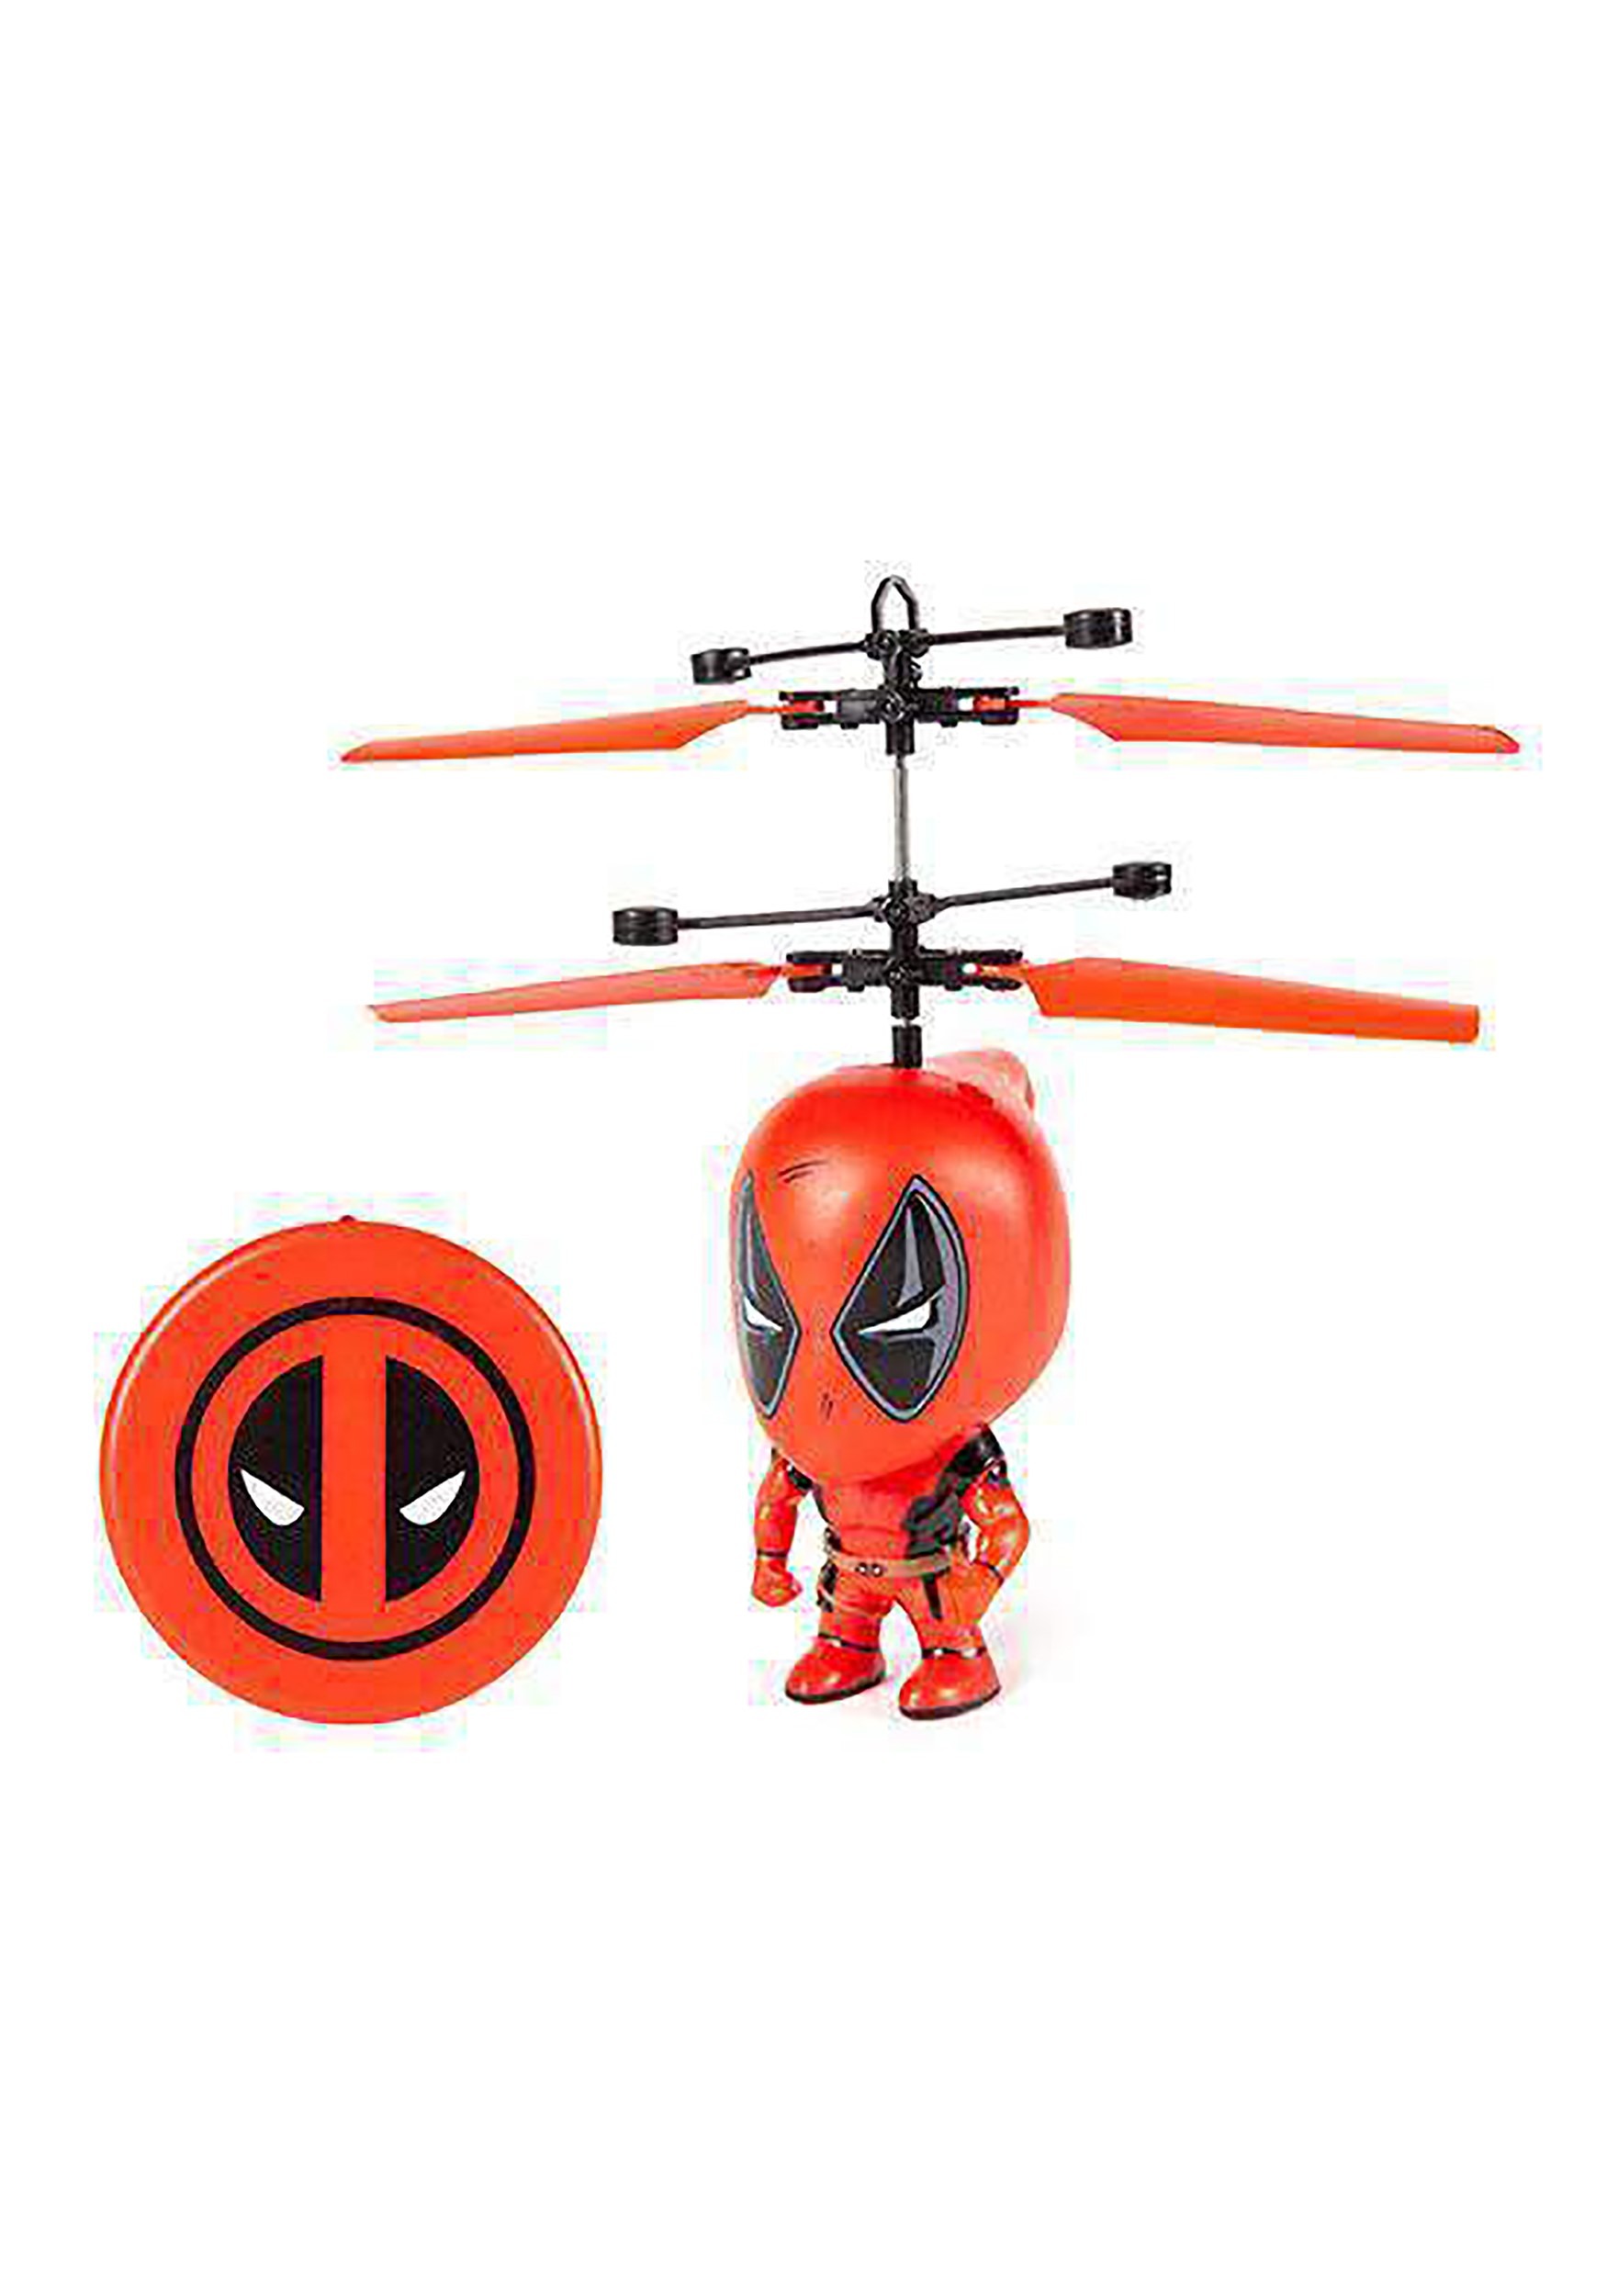 Marvel 3.5 Inch Deadpool Flying Figure IR Helicopter